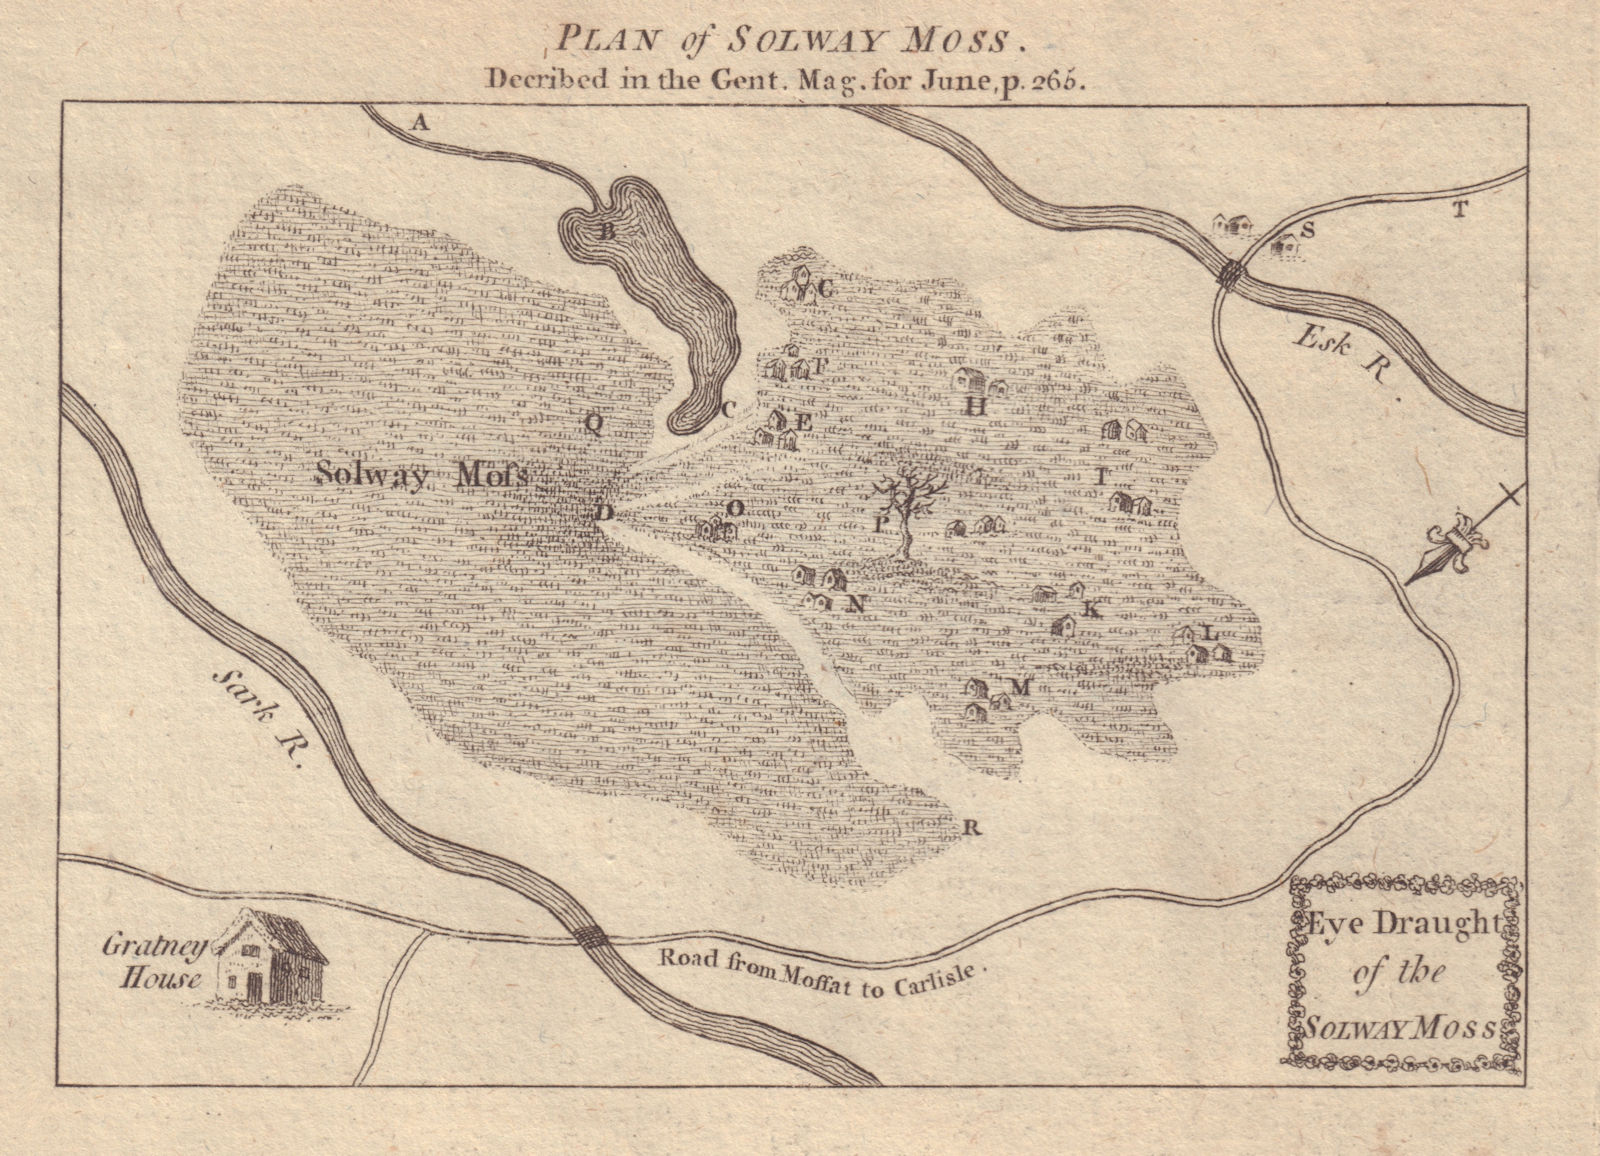 Associate Product Eye Draught of the Solway Moss. Longtown, Cumbria. GENTS MAG 1773 old map